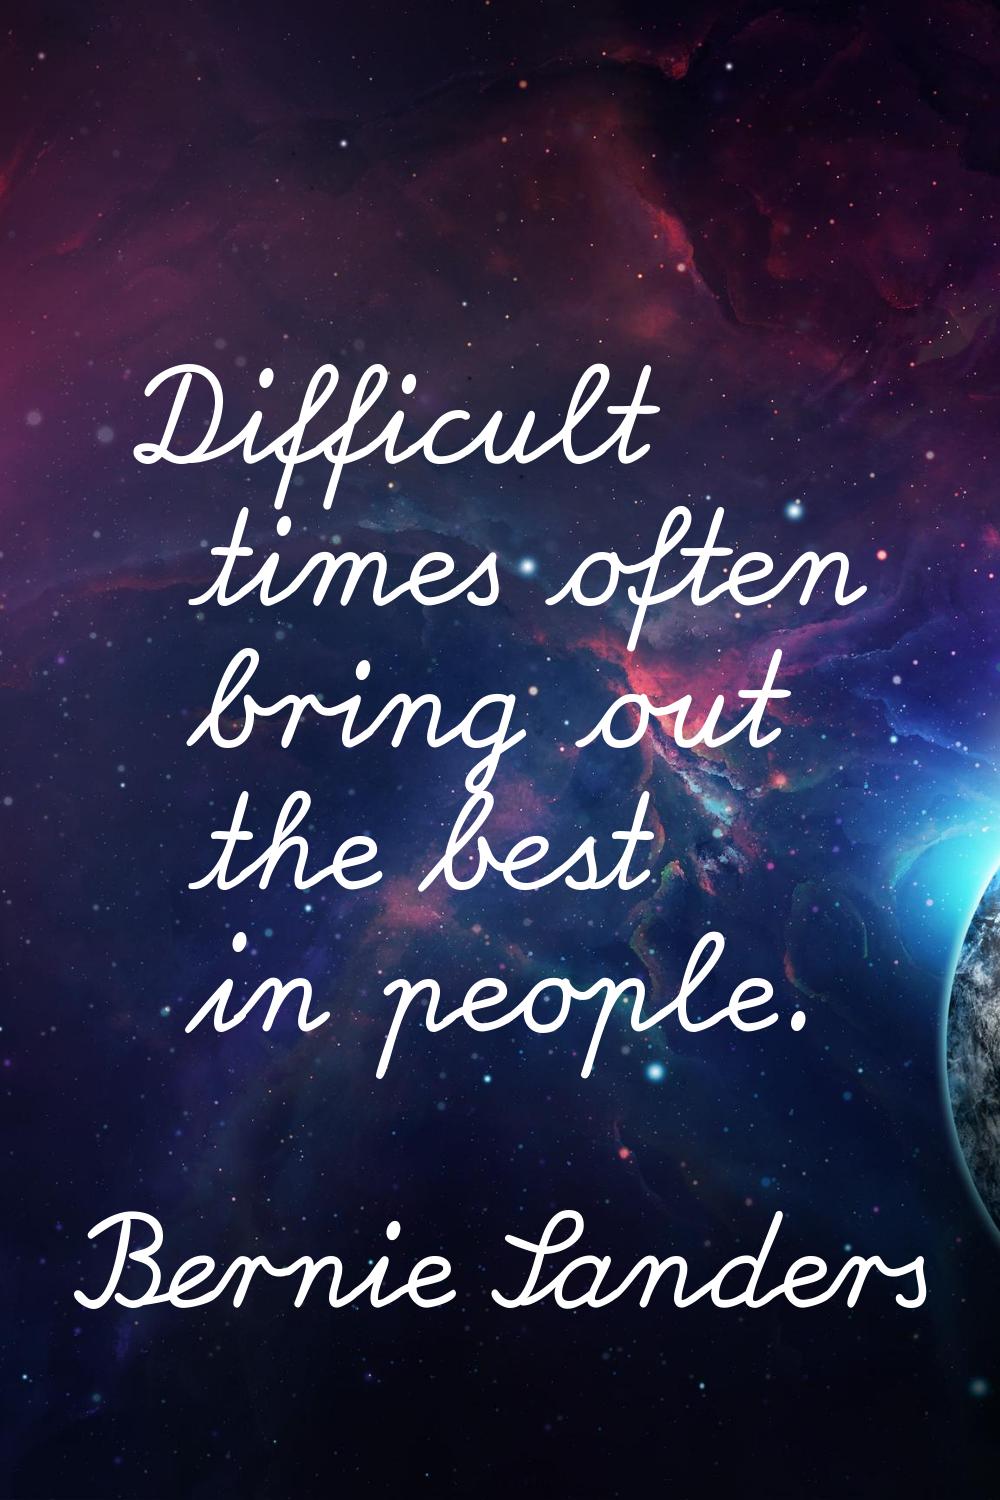 Difficult times often bring out the best in people.